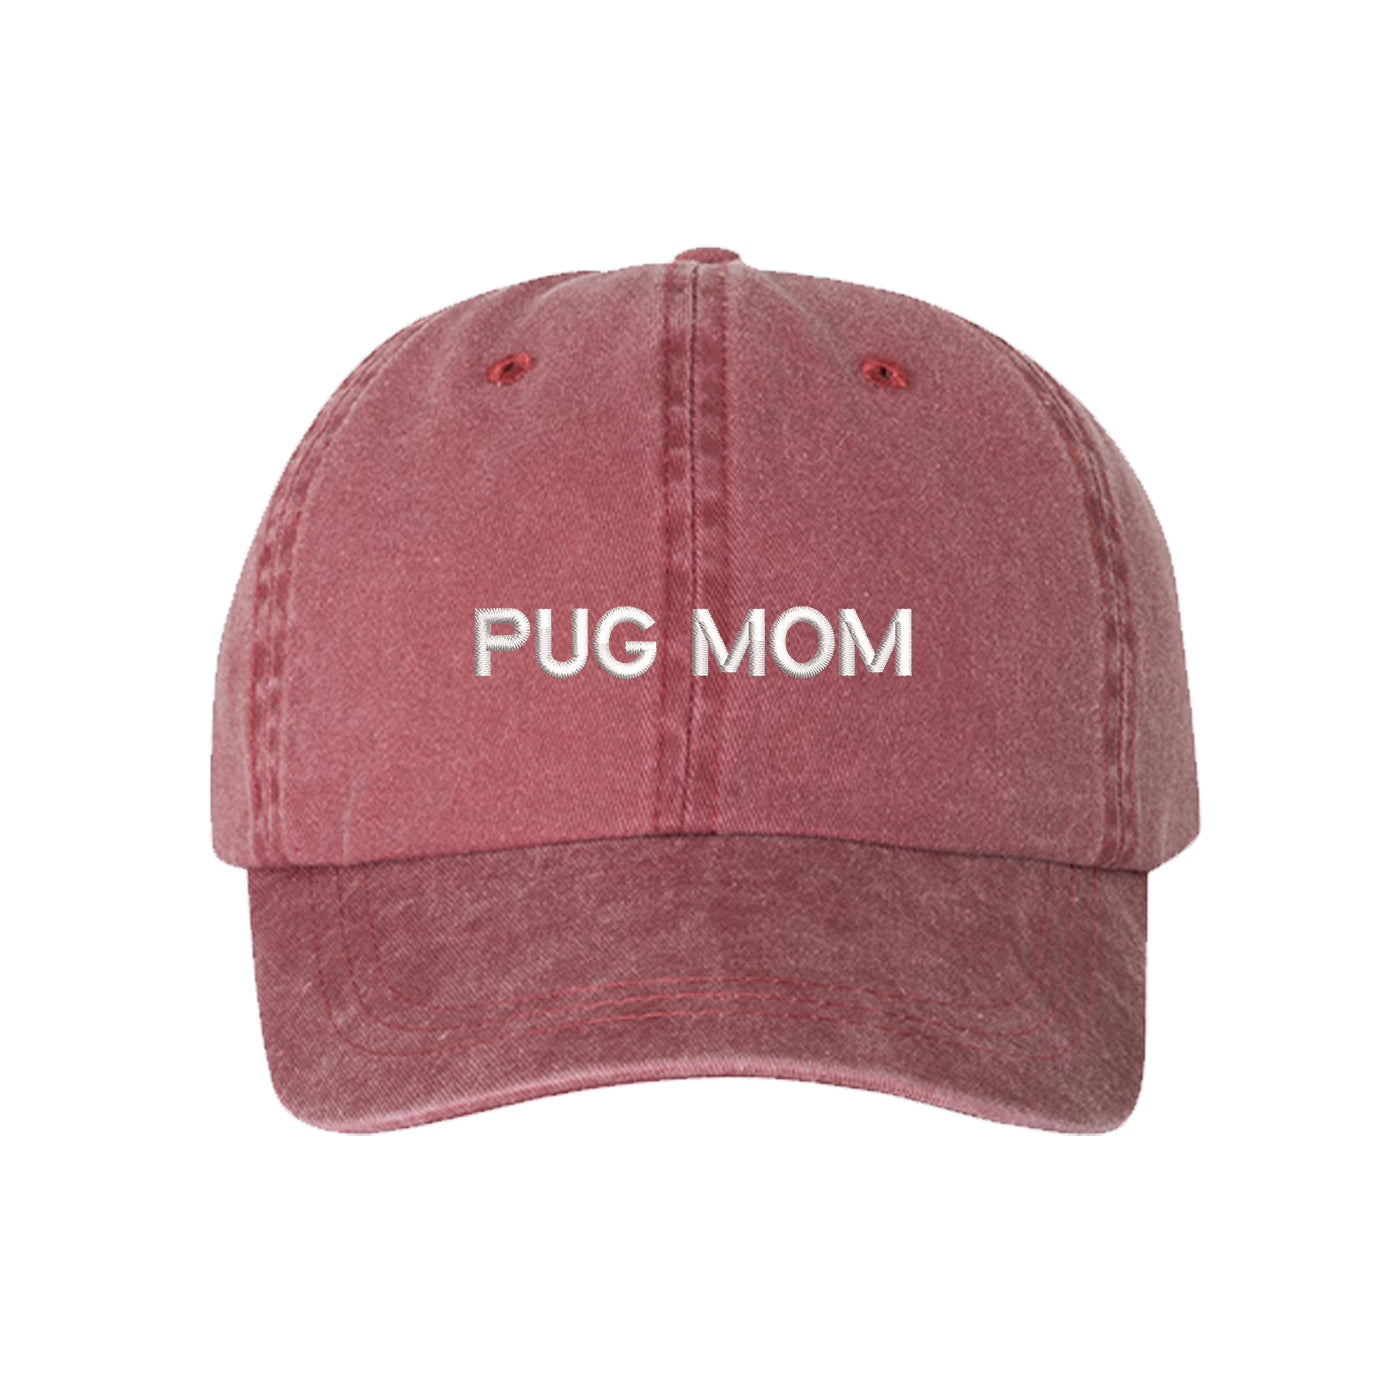 Pug Mom Washed Baseball Hat, Pug Mom Dad Hat, Dog Parent Hats, Embroidered Dad hat, Animal Lover Gifts, Pug Mother, Mothers Day Gift, Pug Mama, DSY Lifestyle Dad Hats, Wine Washed Baseball Hat